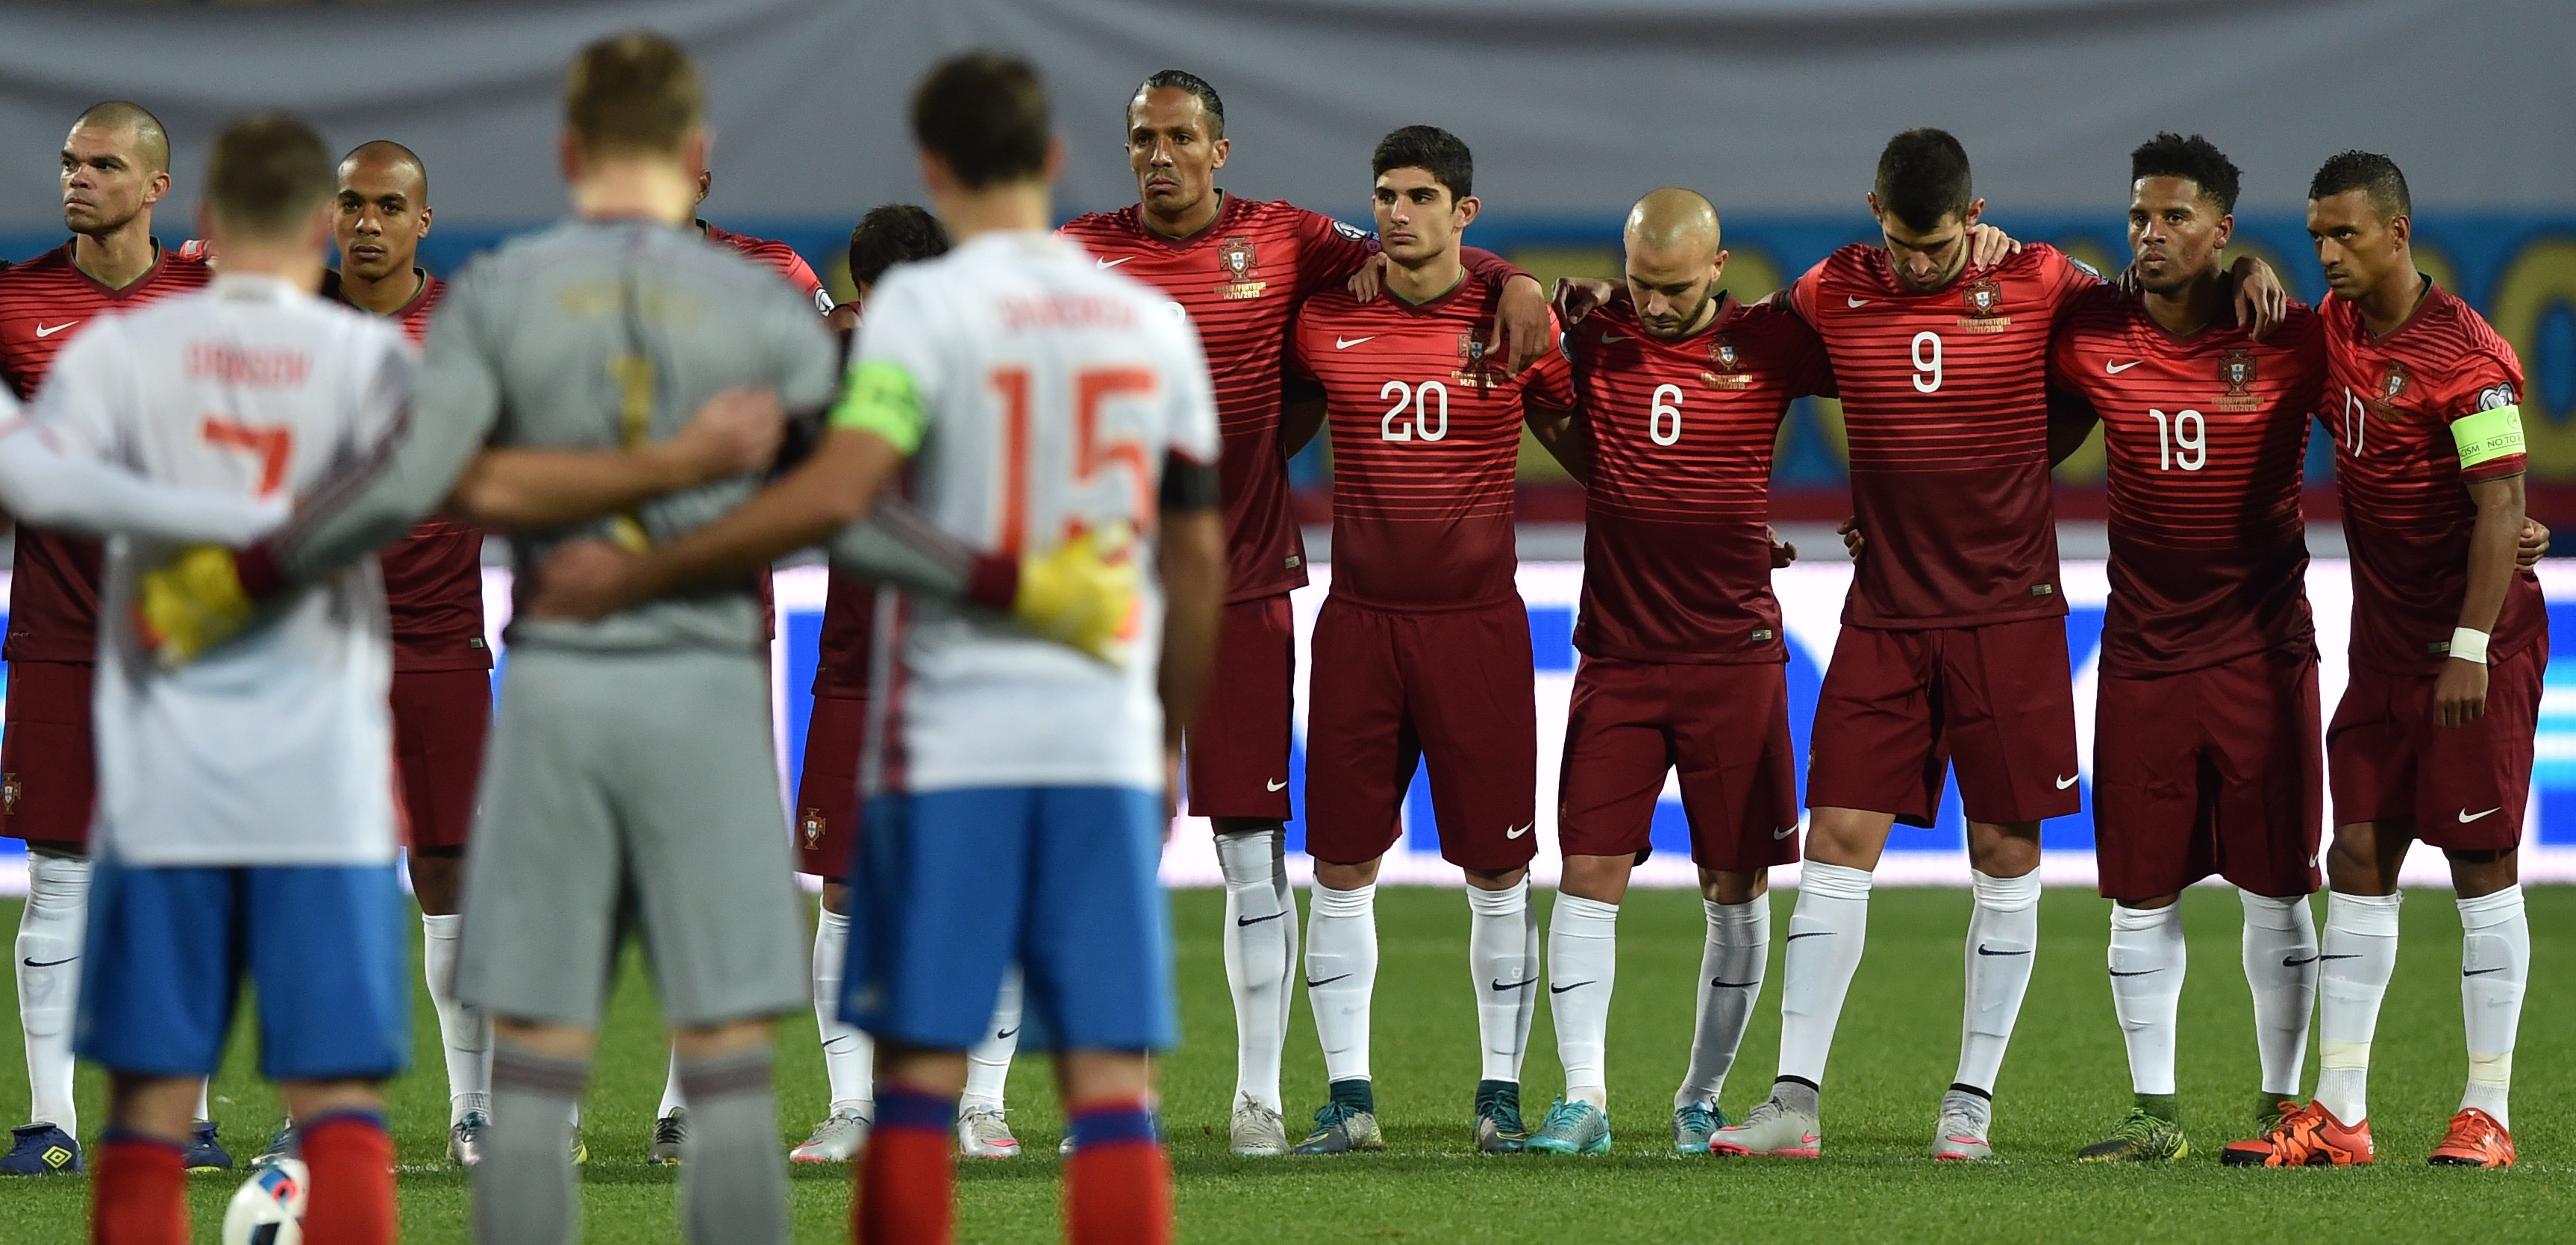 Russia's and Portugal's players observe a minute of silence in honor of victims of the attacks that left at least 120 dead in Paris, prior to the friendly football match between Russia and Portugal in Krasnodar on November 14, 2015. AFP PHOTO / KIRILL KUDRYAVTSEV        (Photo credit should read KIRILL KUDRYAVTSEV/AFP/Getty Images)